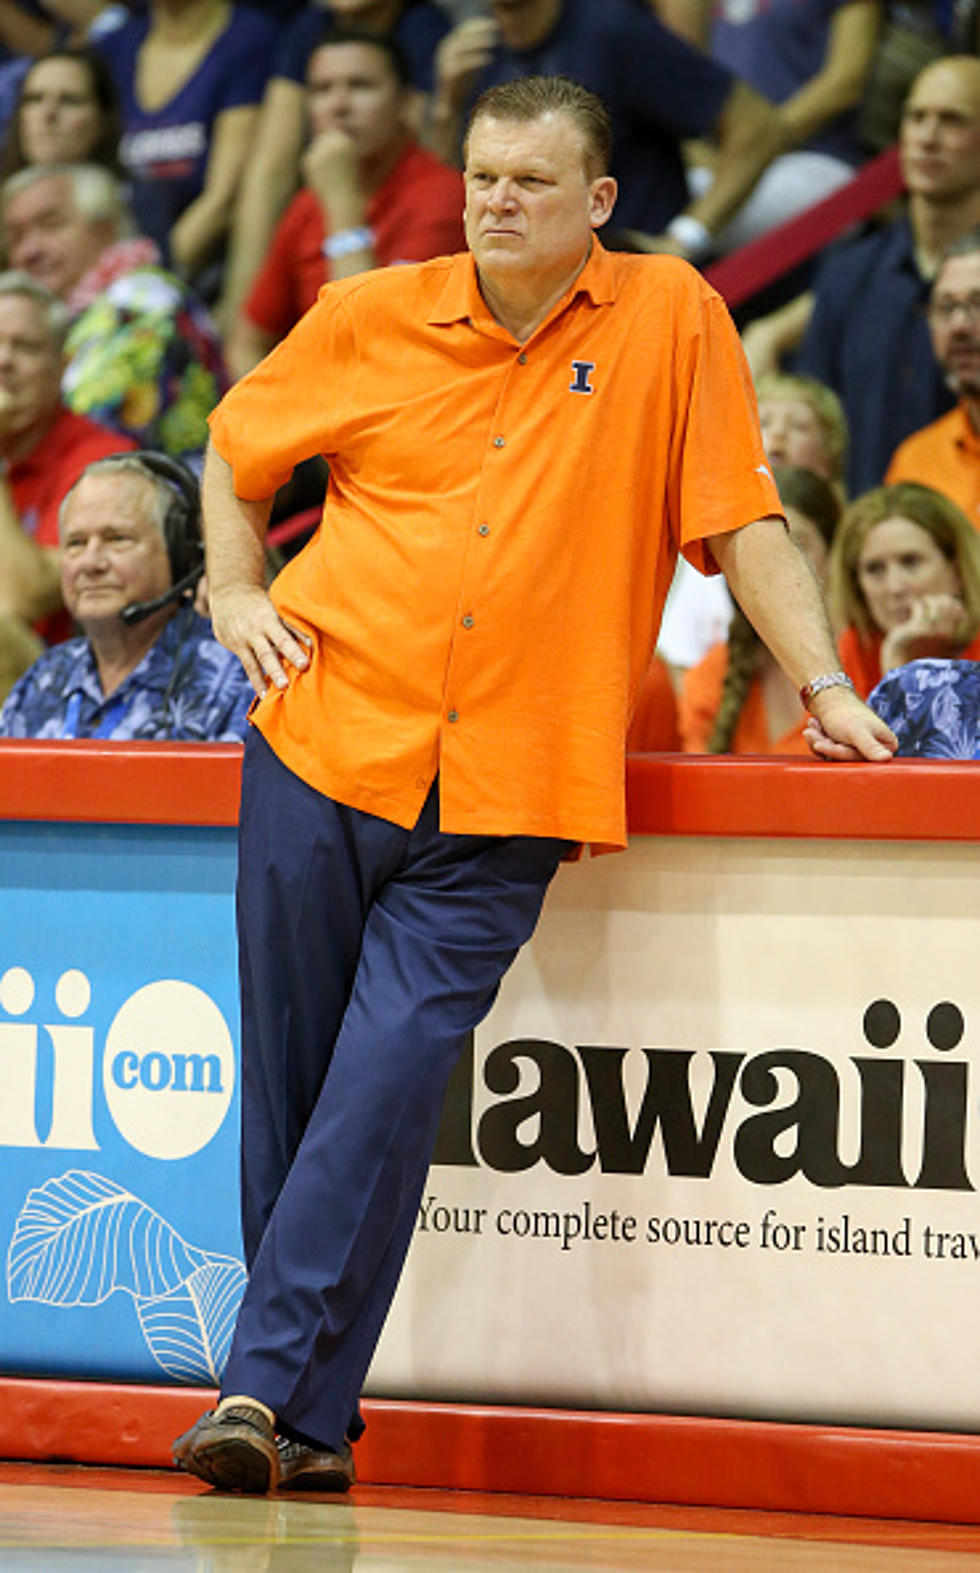 Illinois Basketball Coach Feels Very Safe On Campus